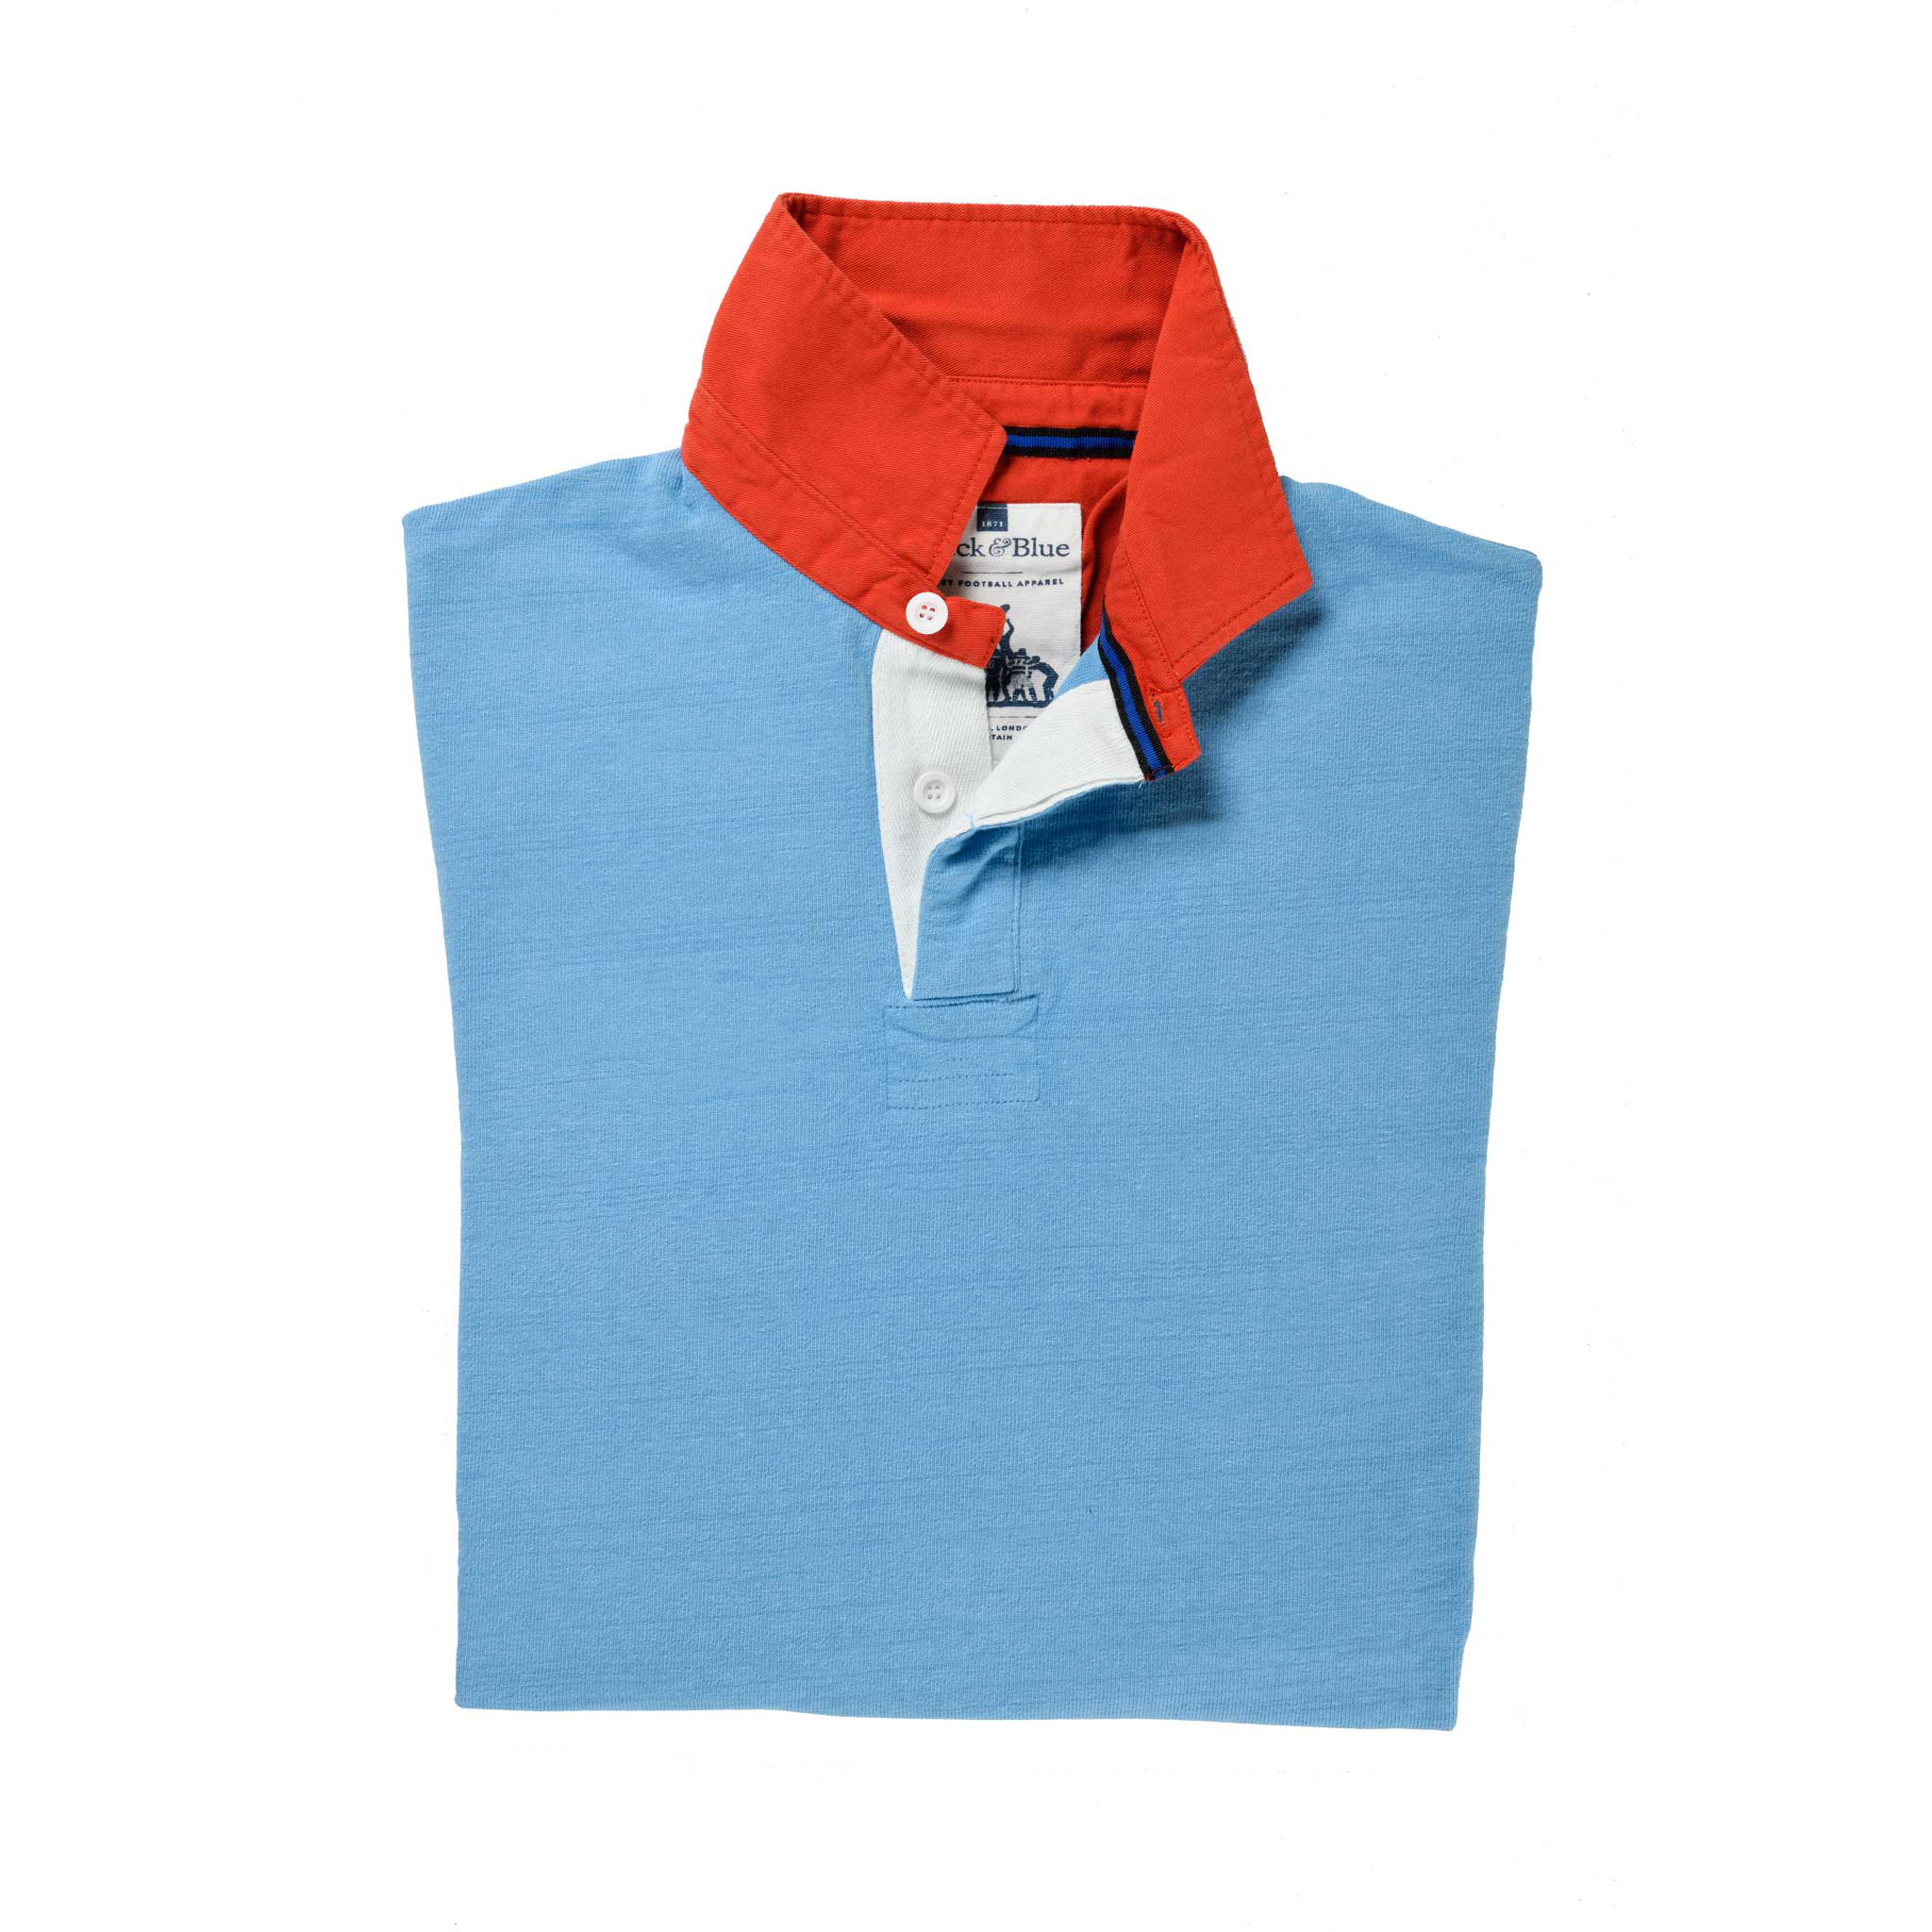 Azure Blue with Red Collar_1871 Rugby Shirt_Folded